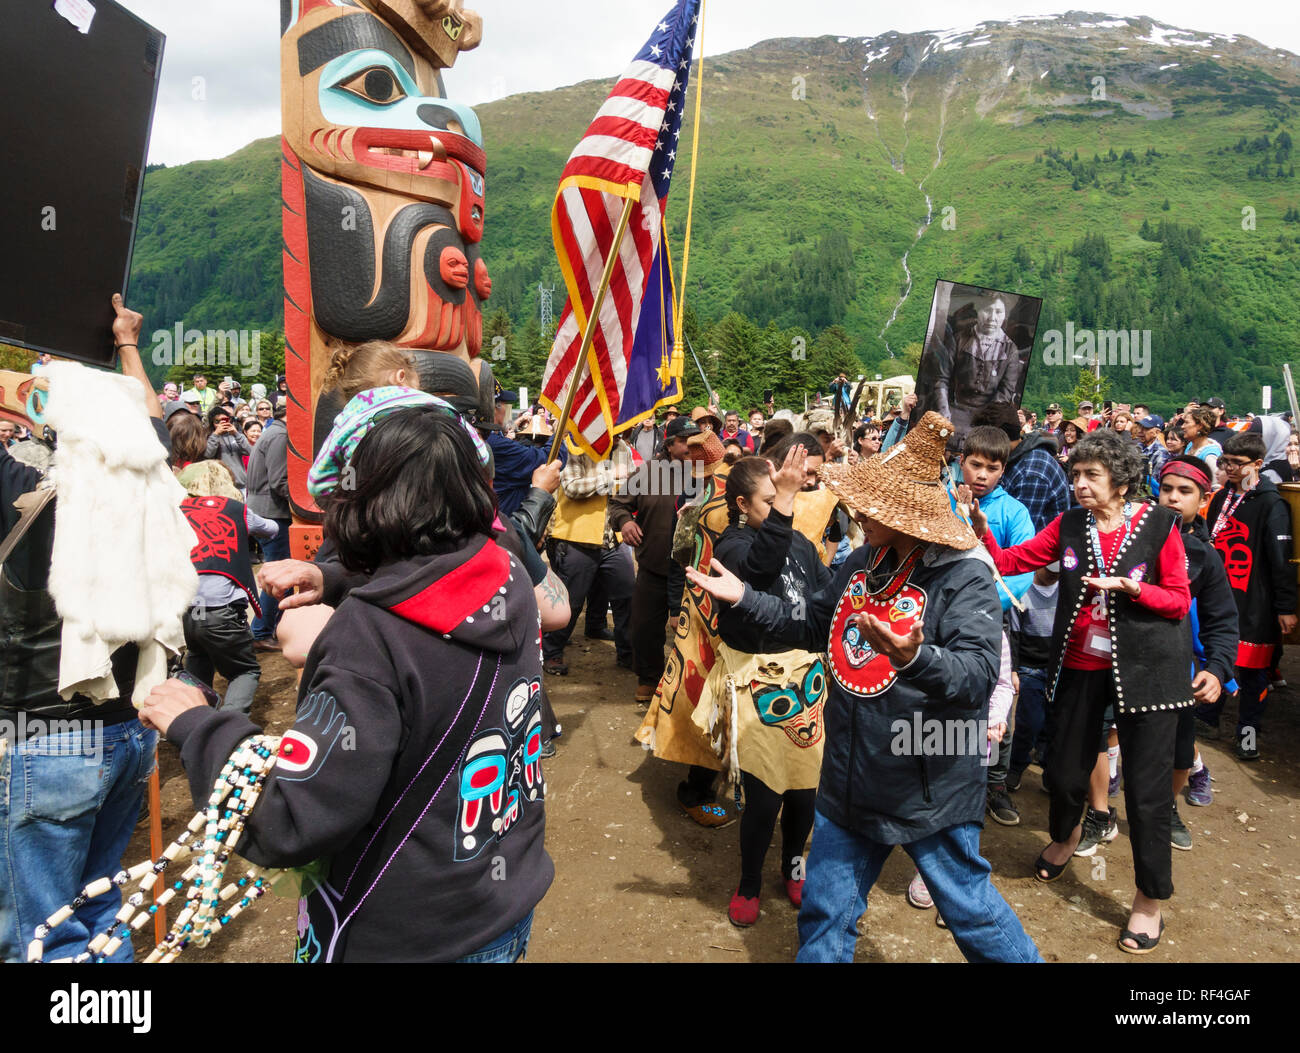 A crowd of people from the Tlingit, Tsimshian and Haida Native American Indian tribes gathered for a totem pole raising celebration, Juneau, Alaska Stock Photo